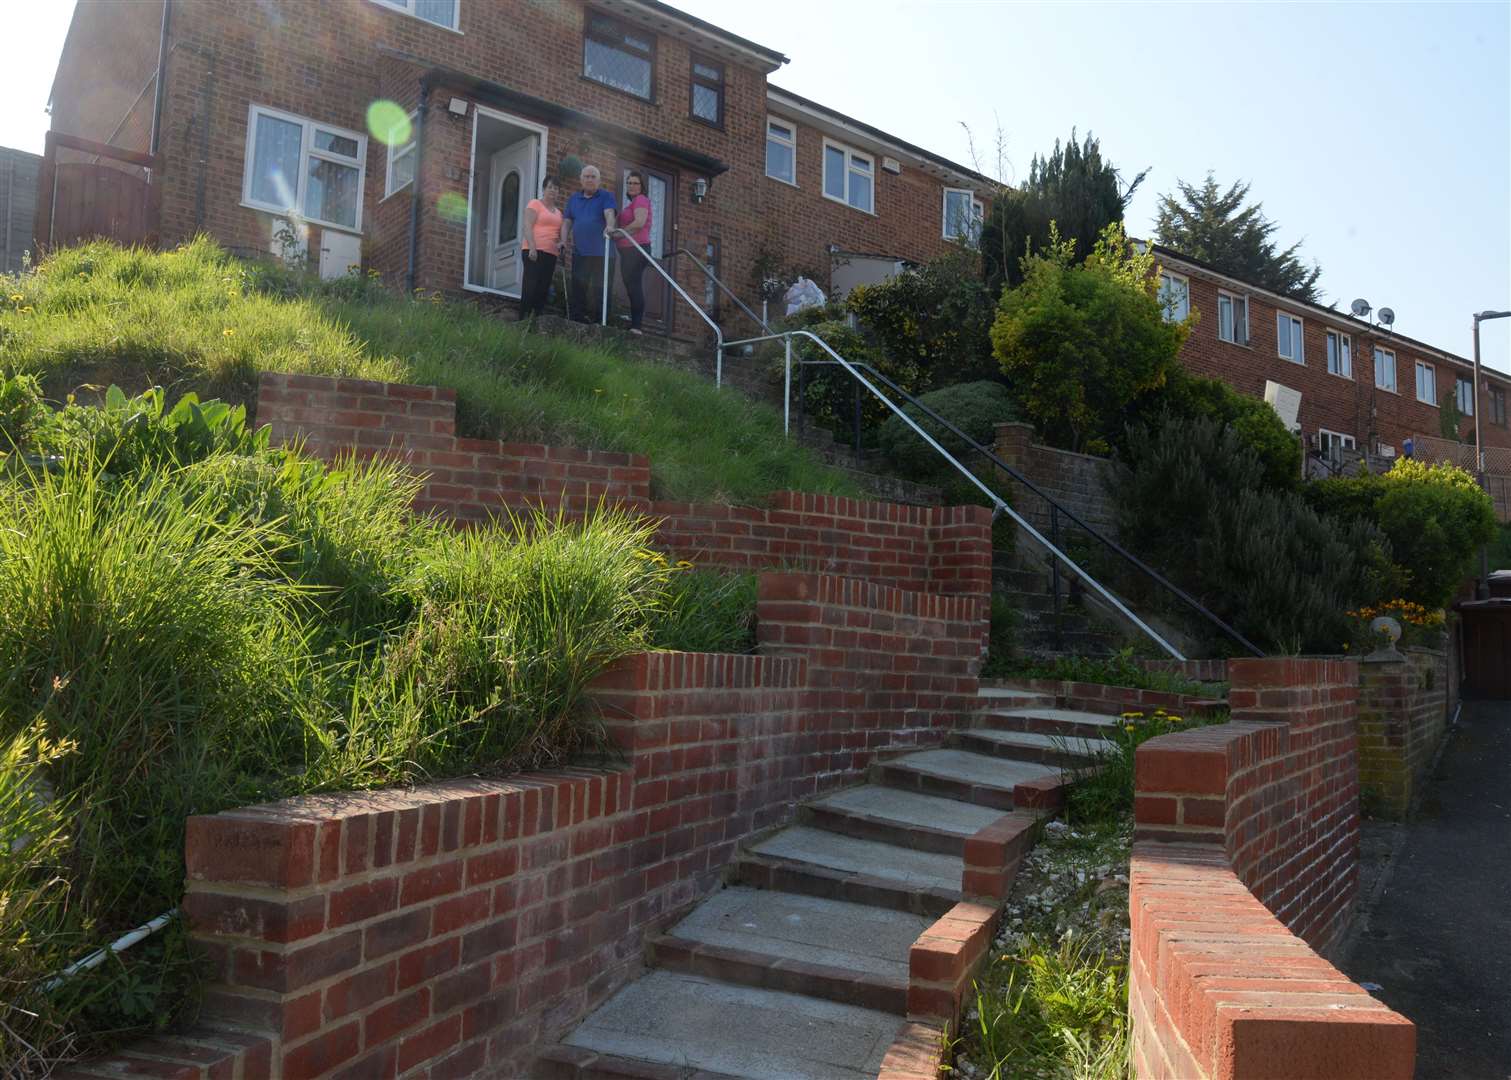 The steps to his home in Limetree Close. Picture: Chris Davey